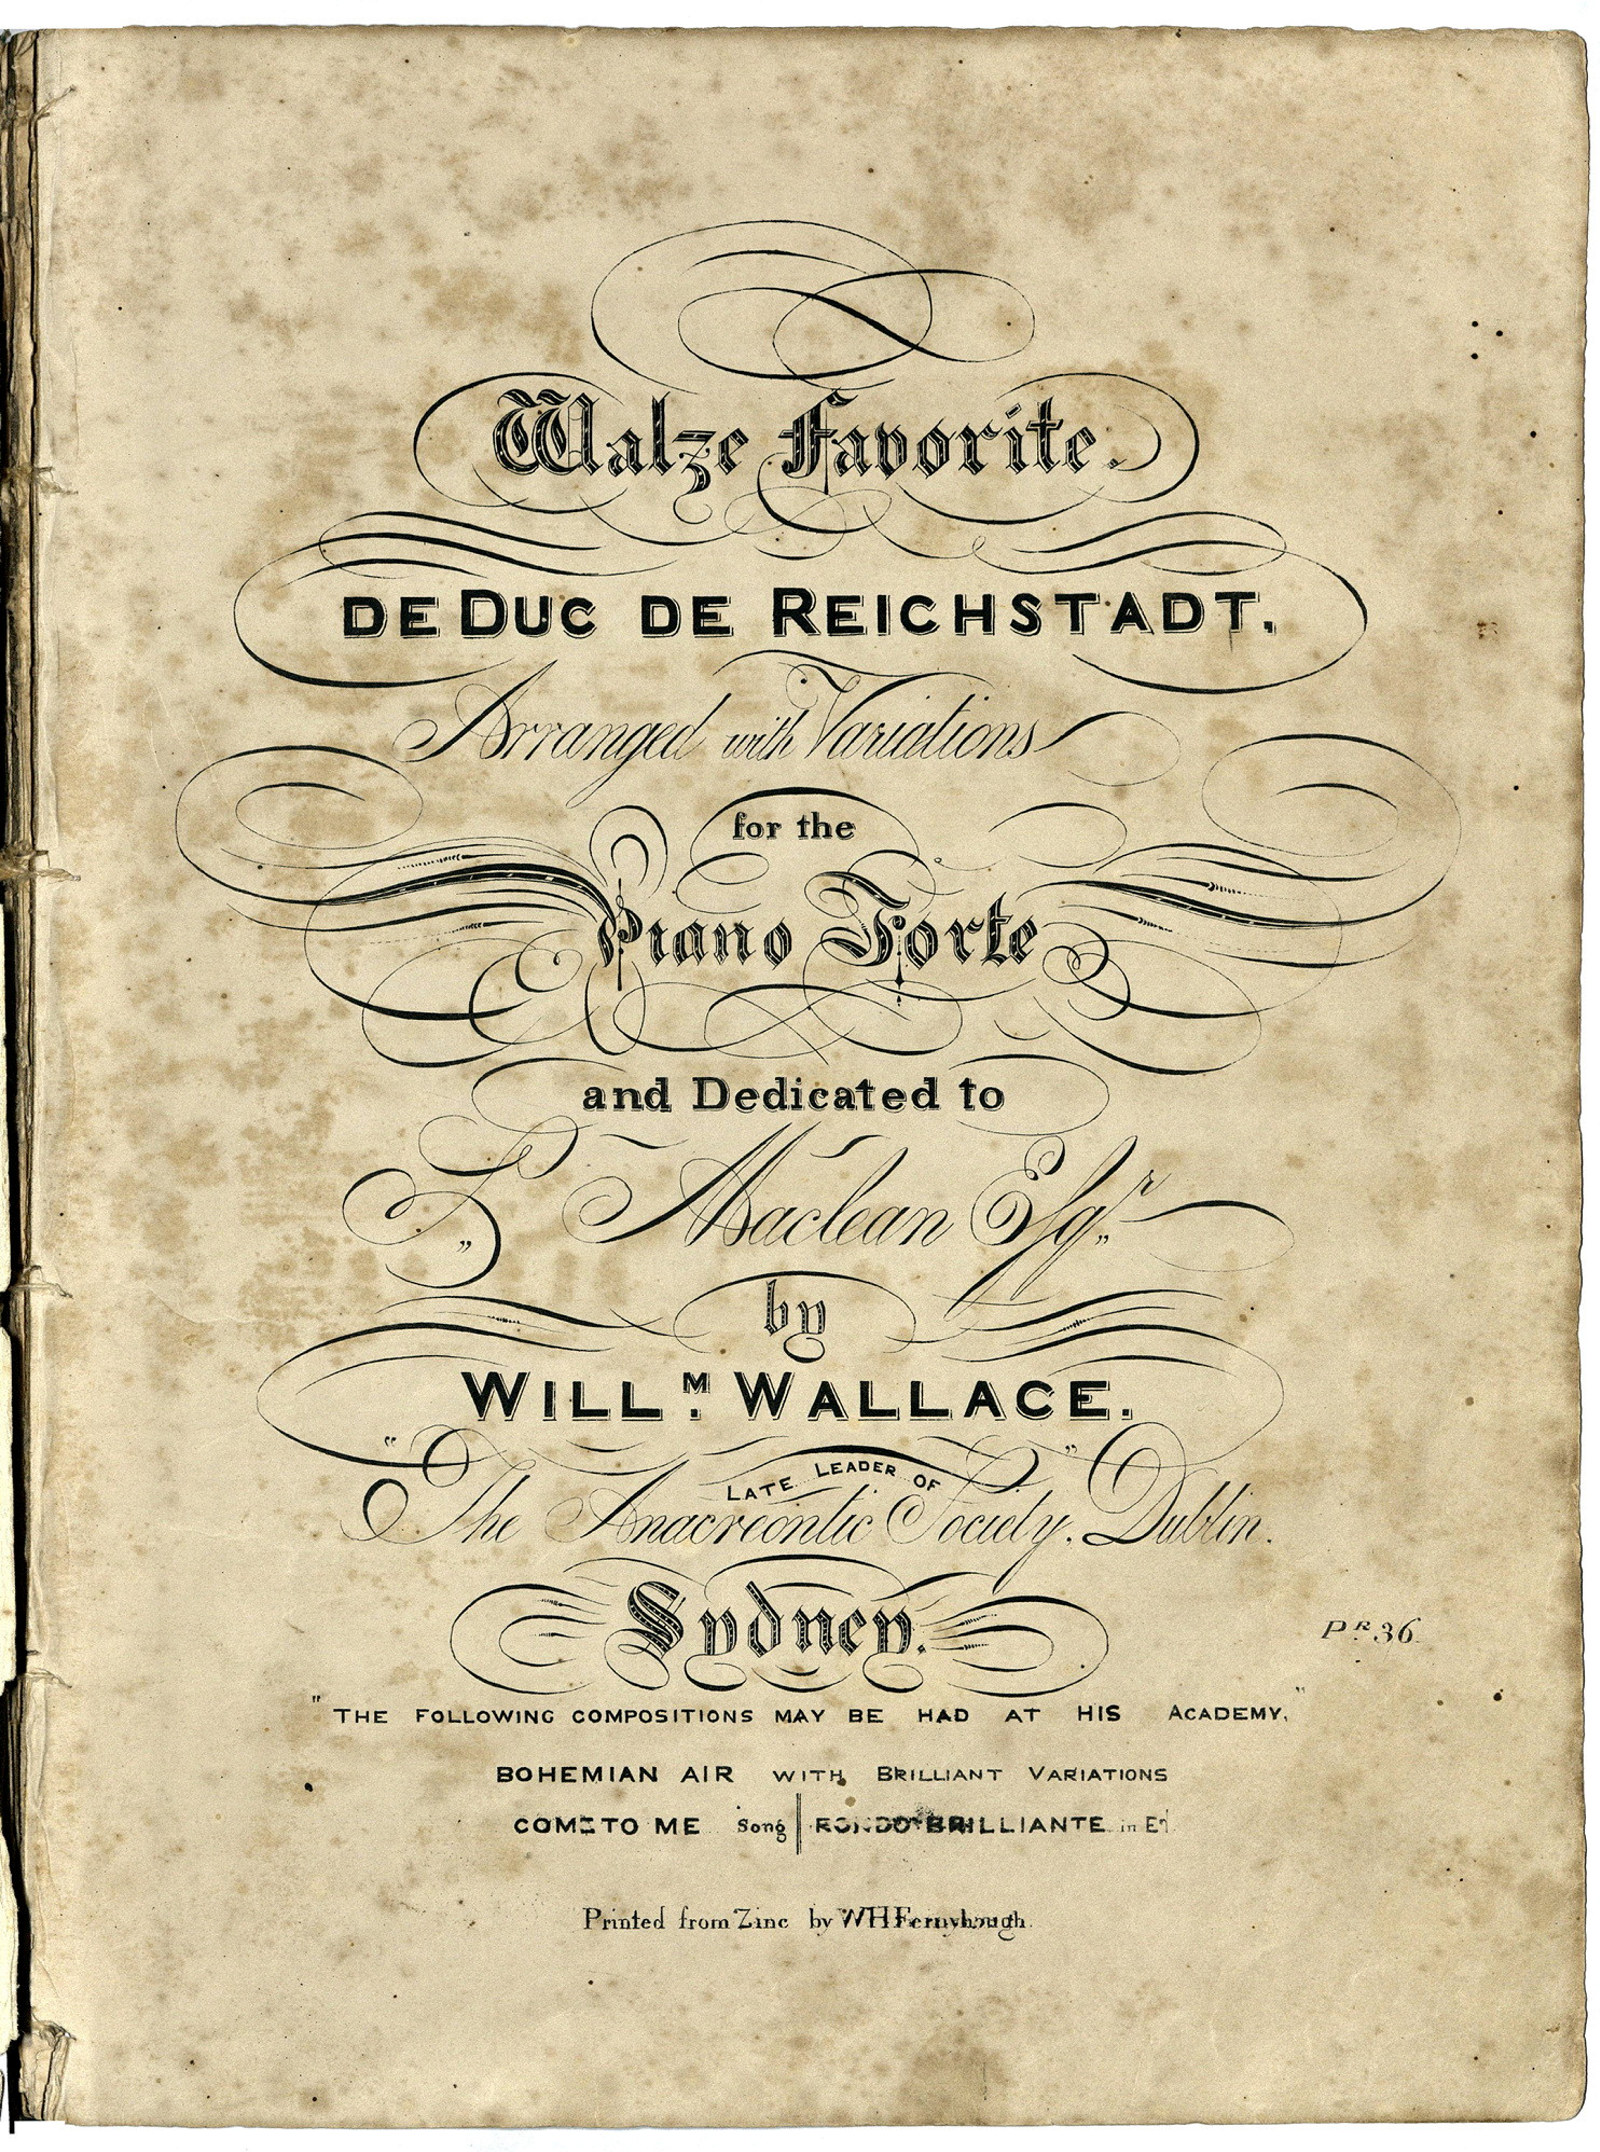 Miss Pye's music book, item 11: Walze favorite de Duc de Reichstadt, arranged with variations for the piano forte and dedicated to J. Maclean Esq. by Willm. Wallace, late leader of the Anacreontic Society, Dublin